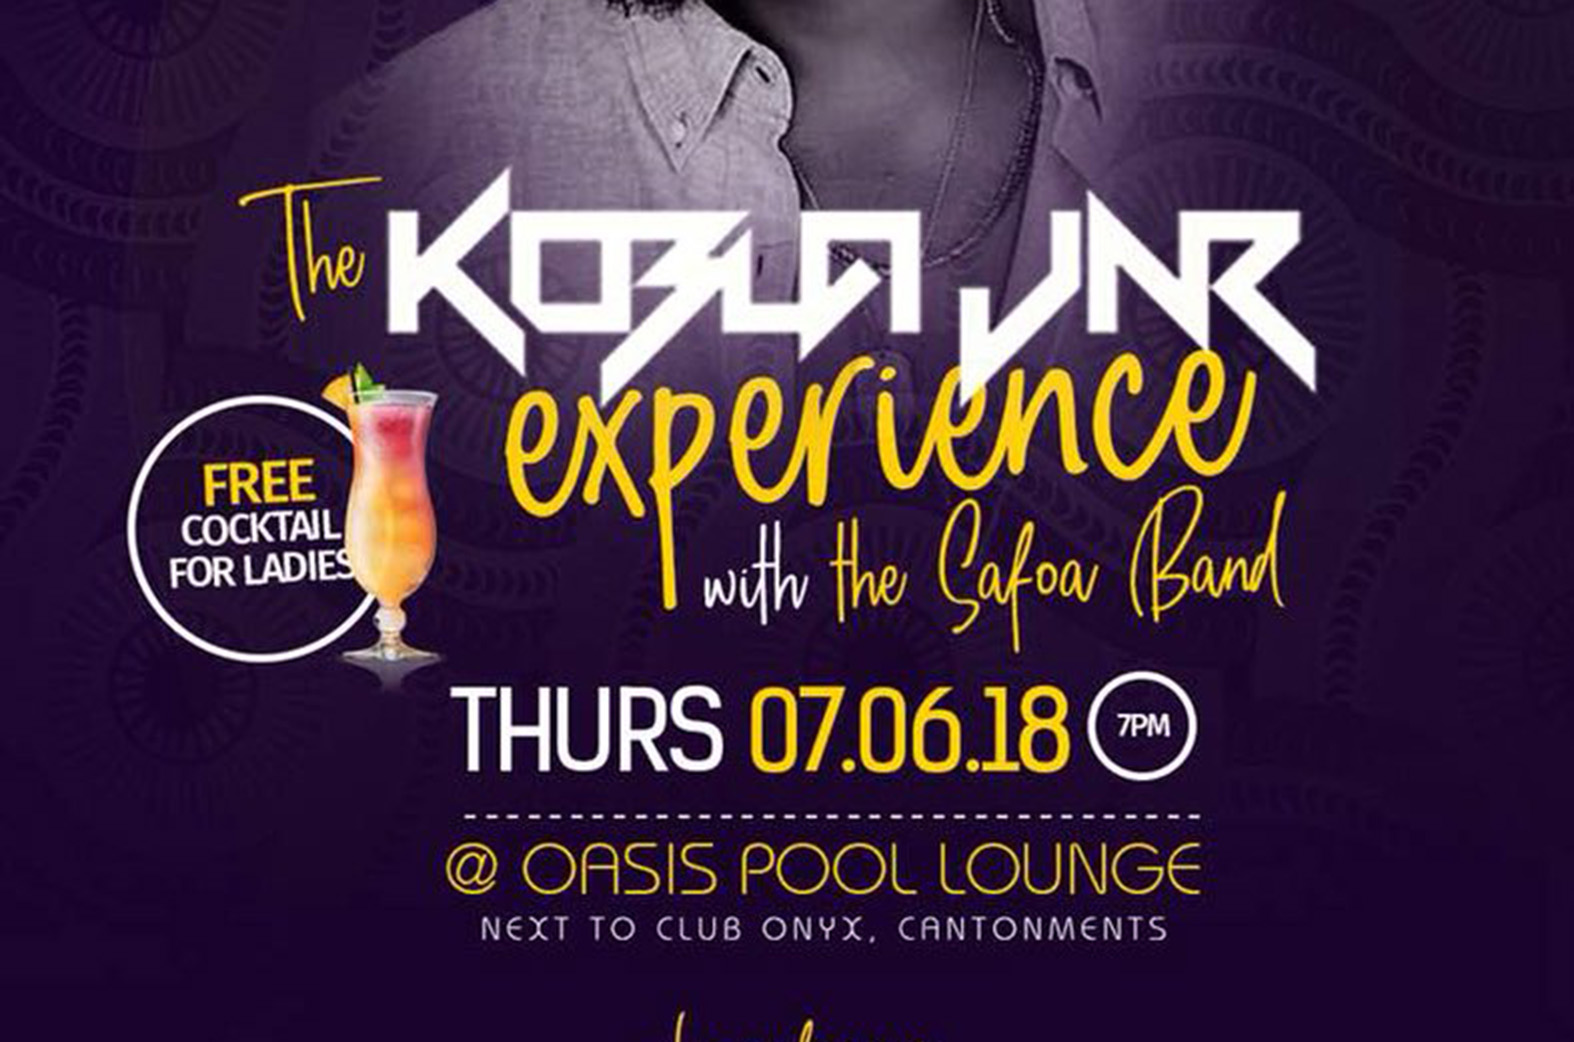 The Kobla Jnr Experience live band show